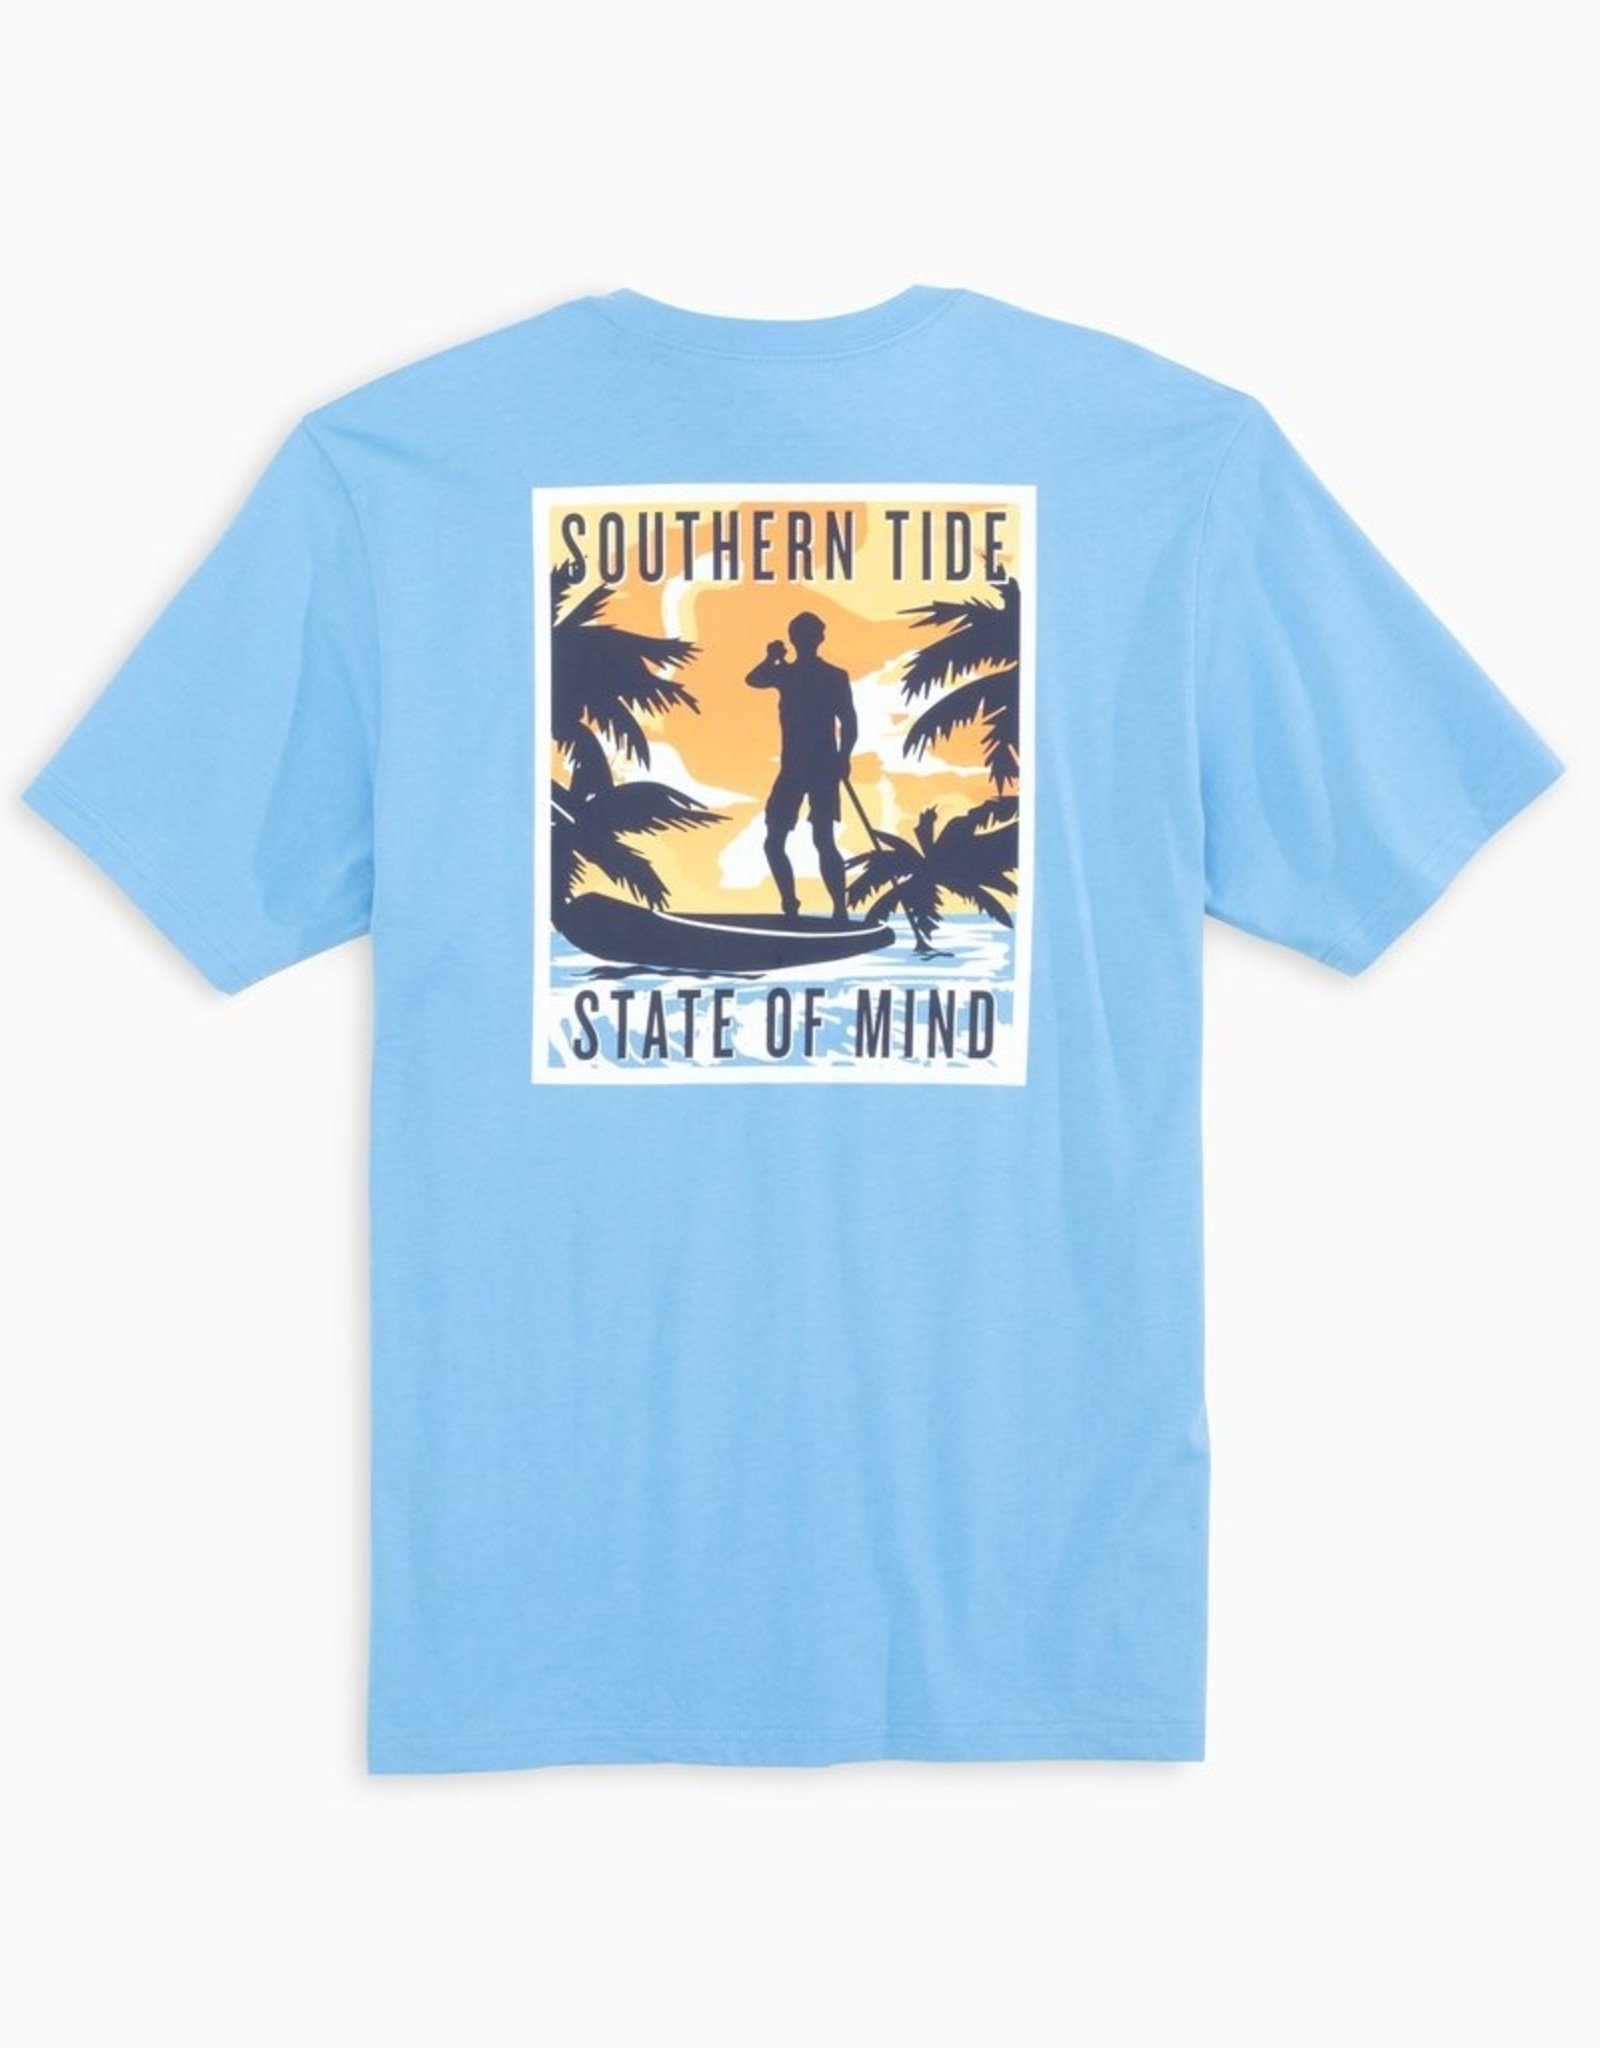 Southern Tide State of Mind Tee